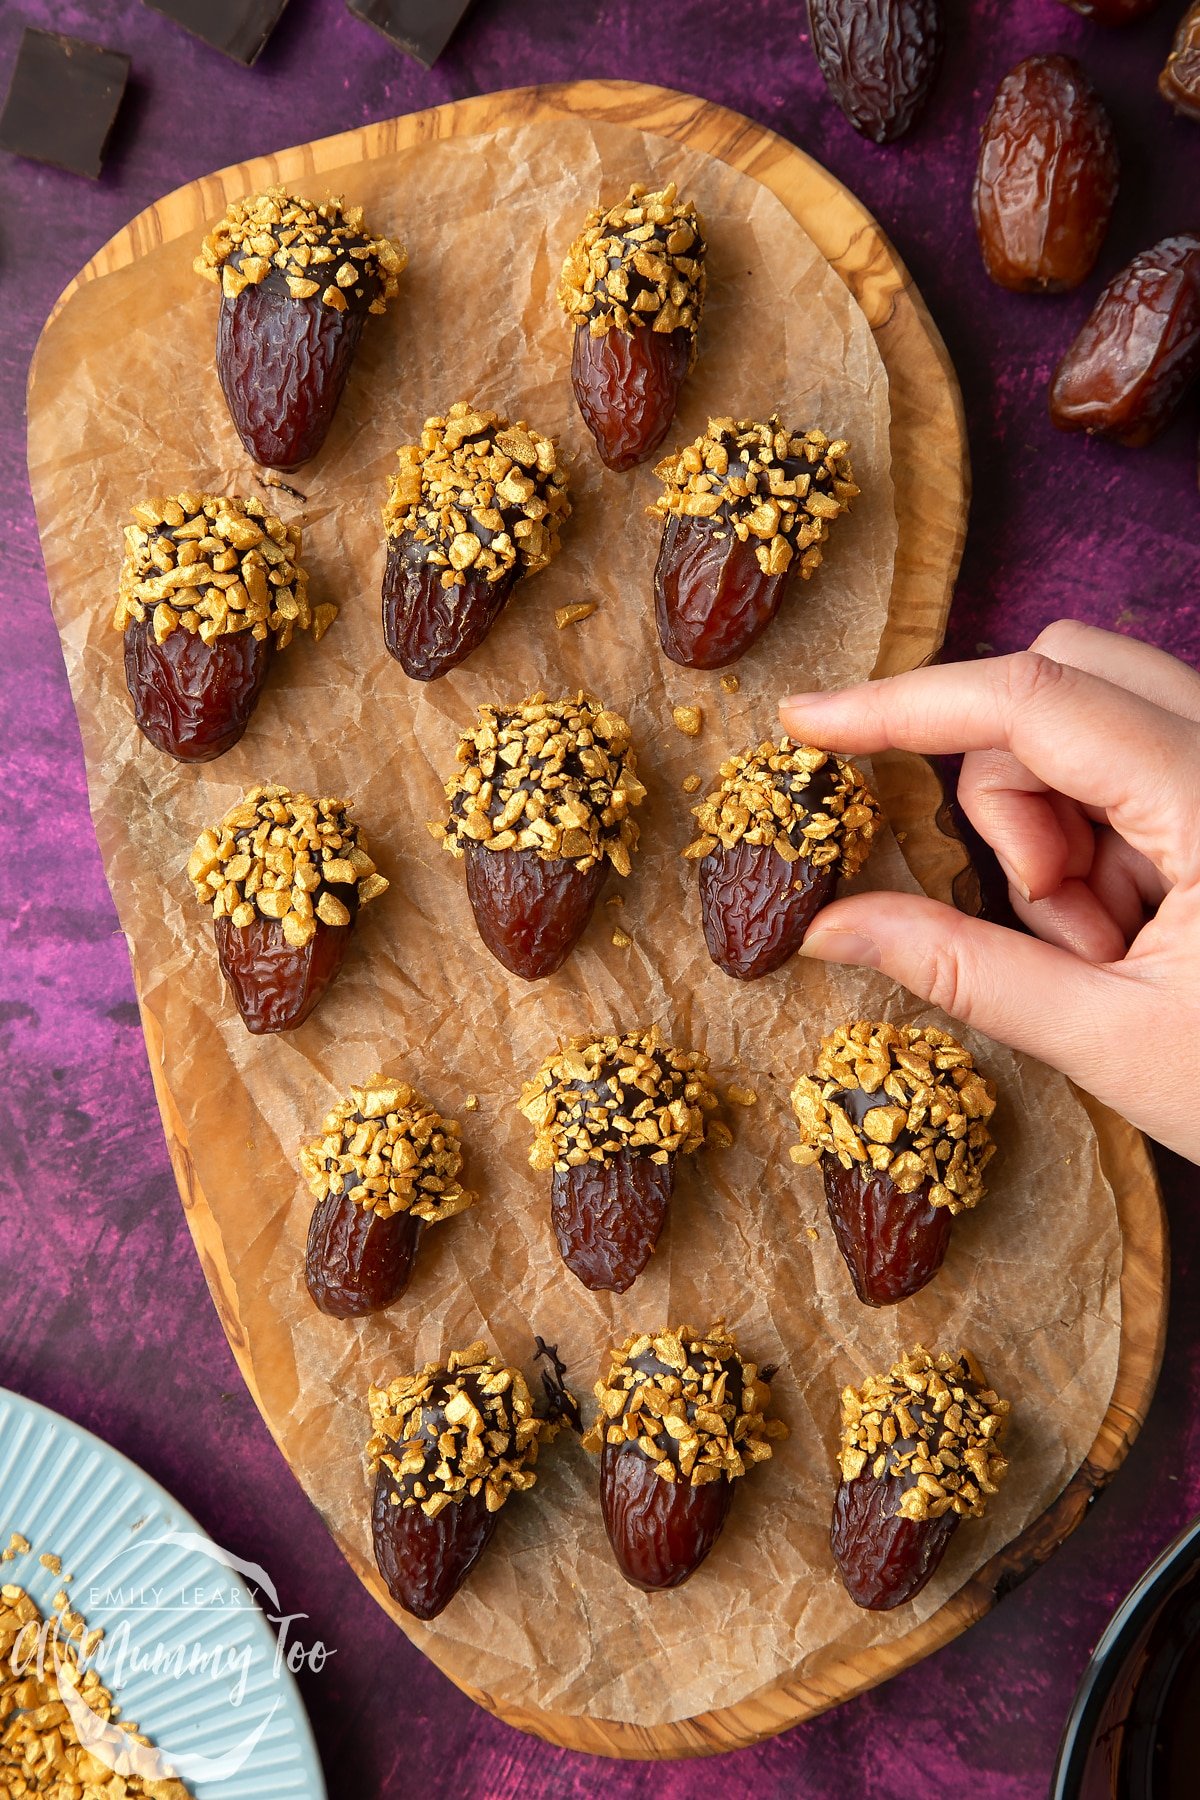 Medjool dates dipped in chocolate. The chocolate dates are on a wooden board lined with brown baking paper. The dates have be studded with gold chopped nuts. A hand reaches to take one.